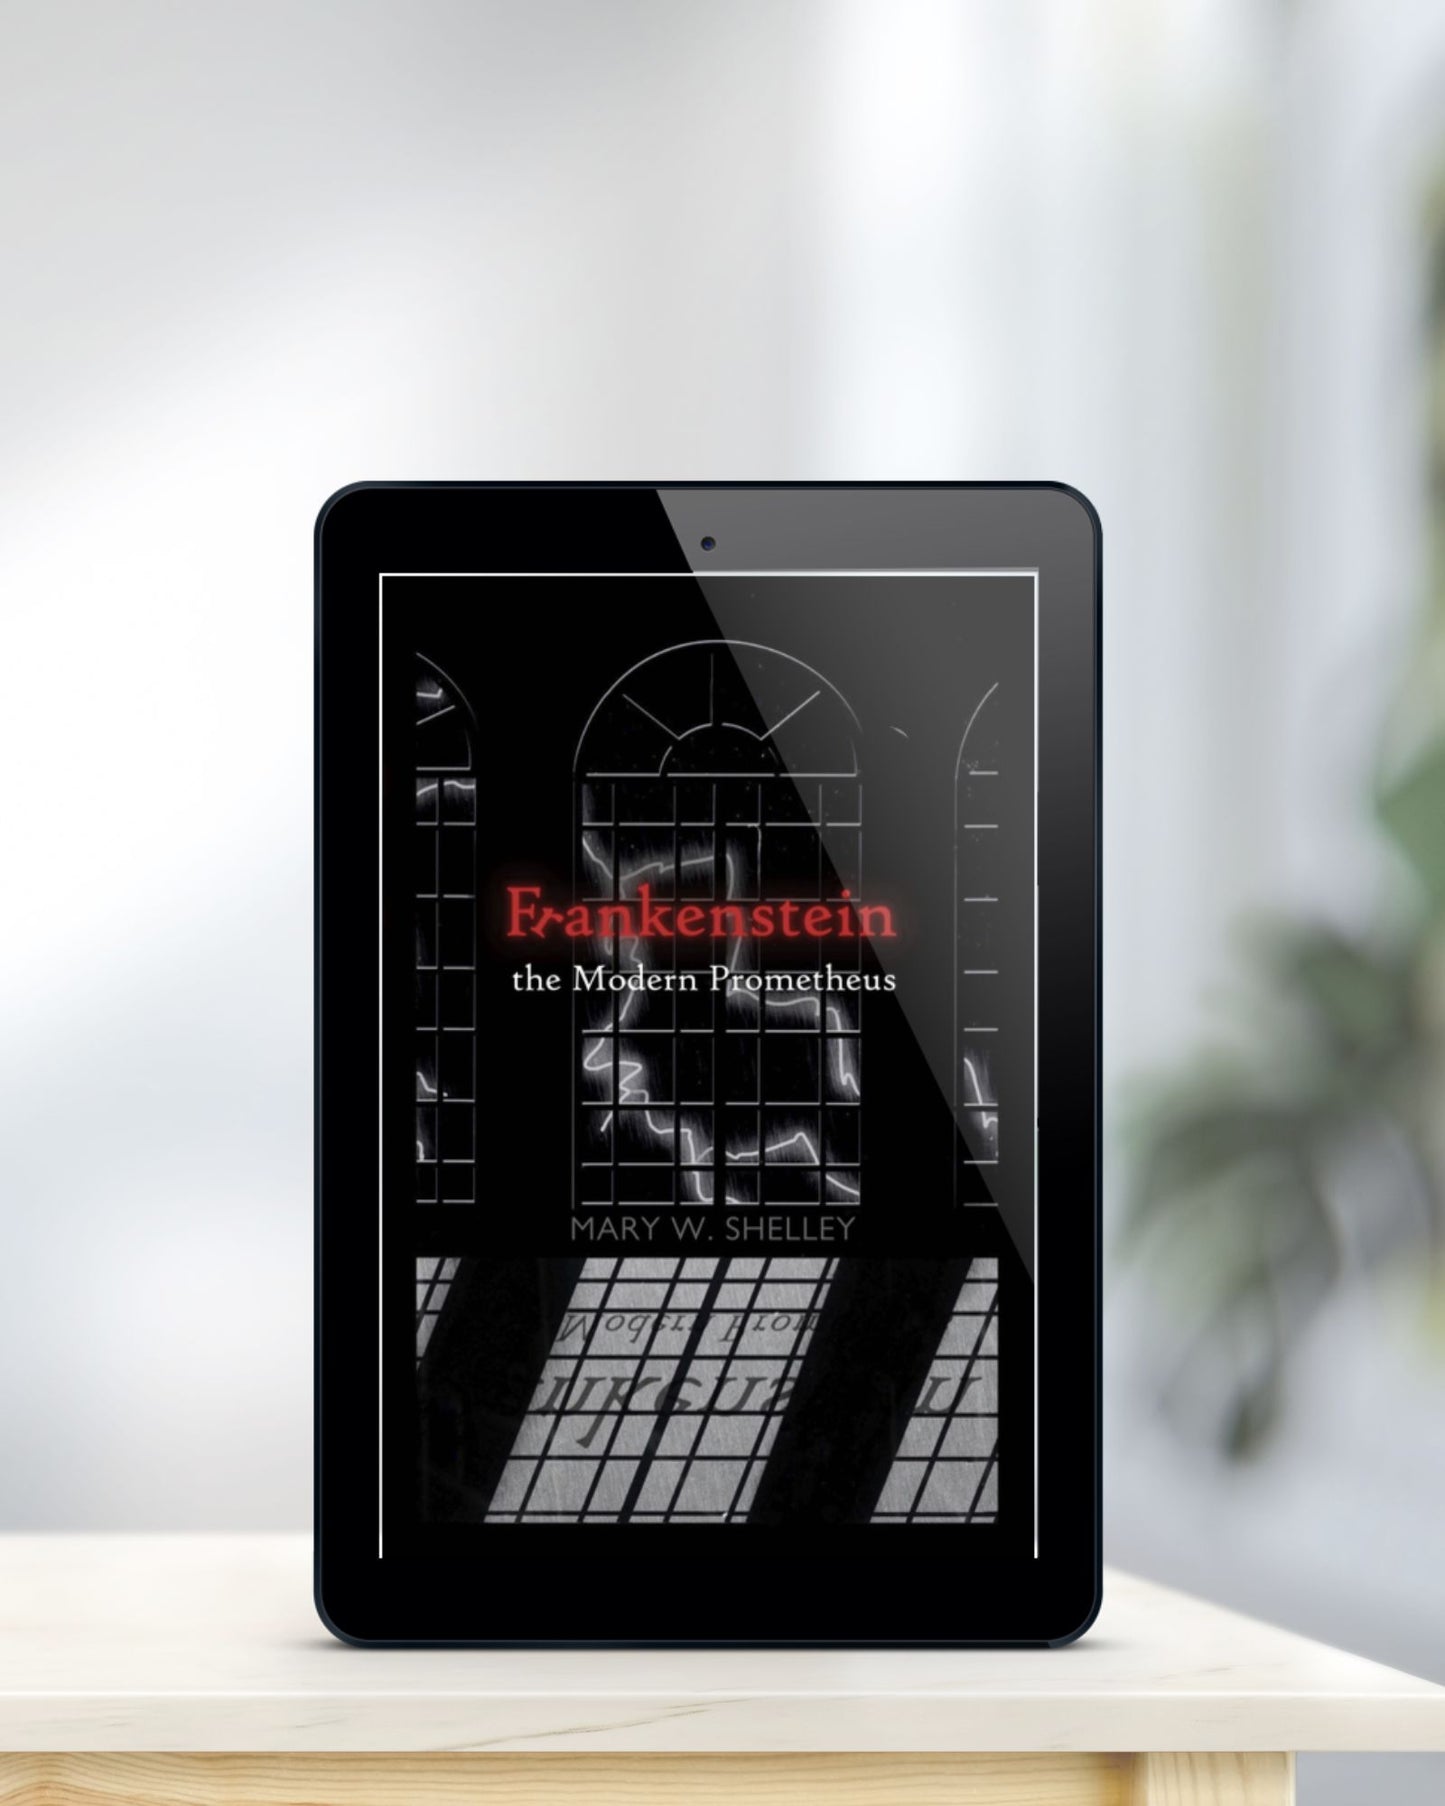 Tablet displaying black ebook cover of "Frankenstein: the Modern Prometheus" is standing on a blonde table in front of blurred background.